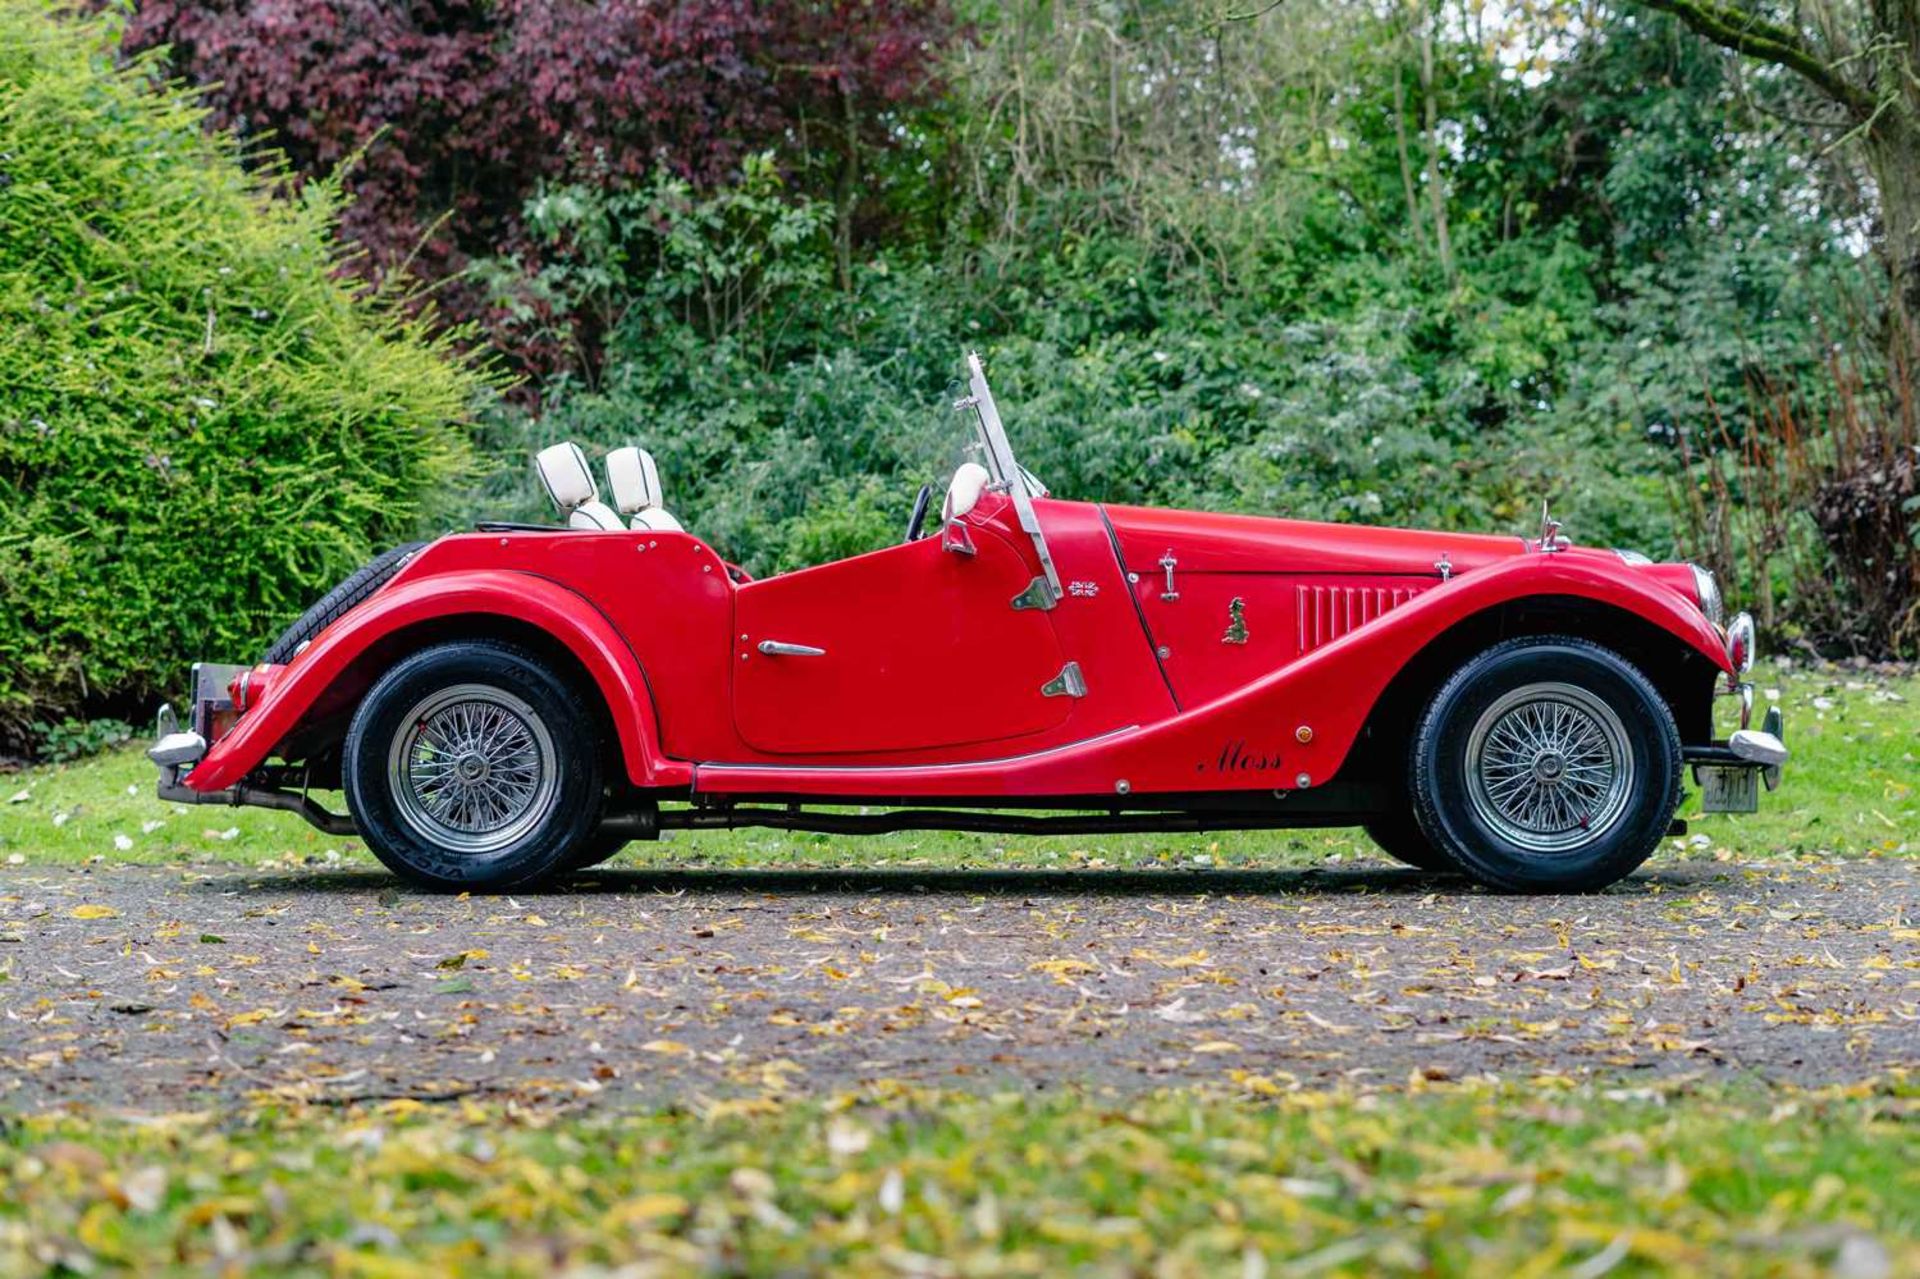 1990 Moss Sport Roadster ***NO RESERVE*** 123 of c.150 Moss Roadsters built, powered by a 2-litre MK - Image 14 of 60